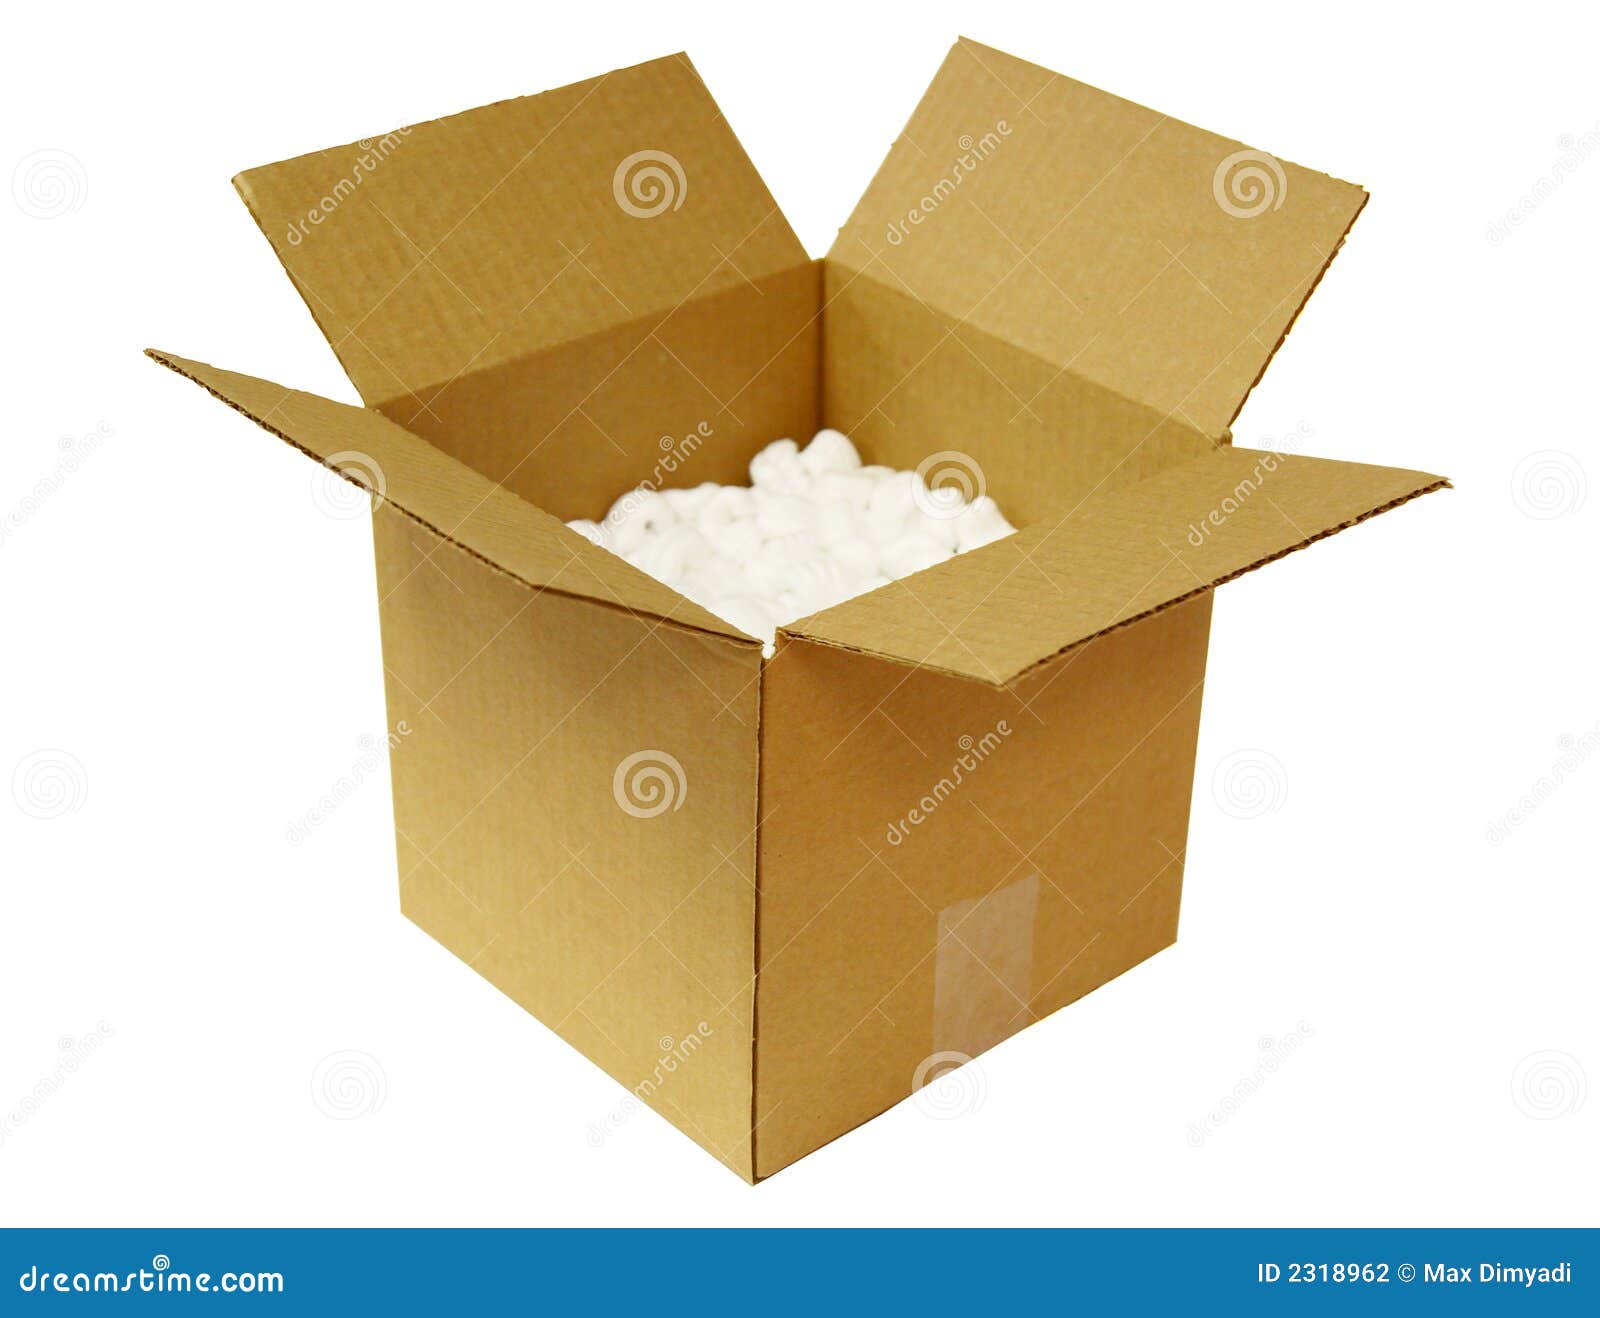 Open Cardboard Box stock photo. Image of objects, service ...
 Open Box